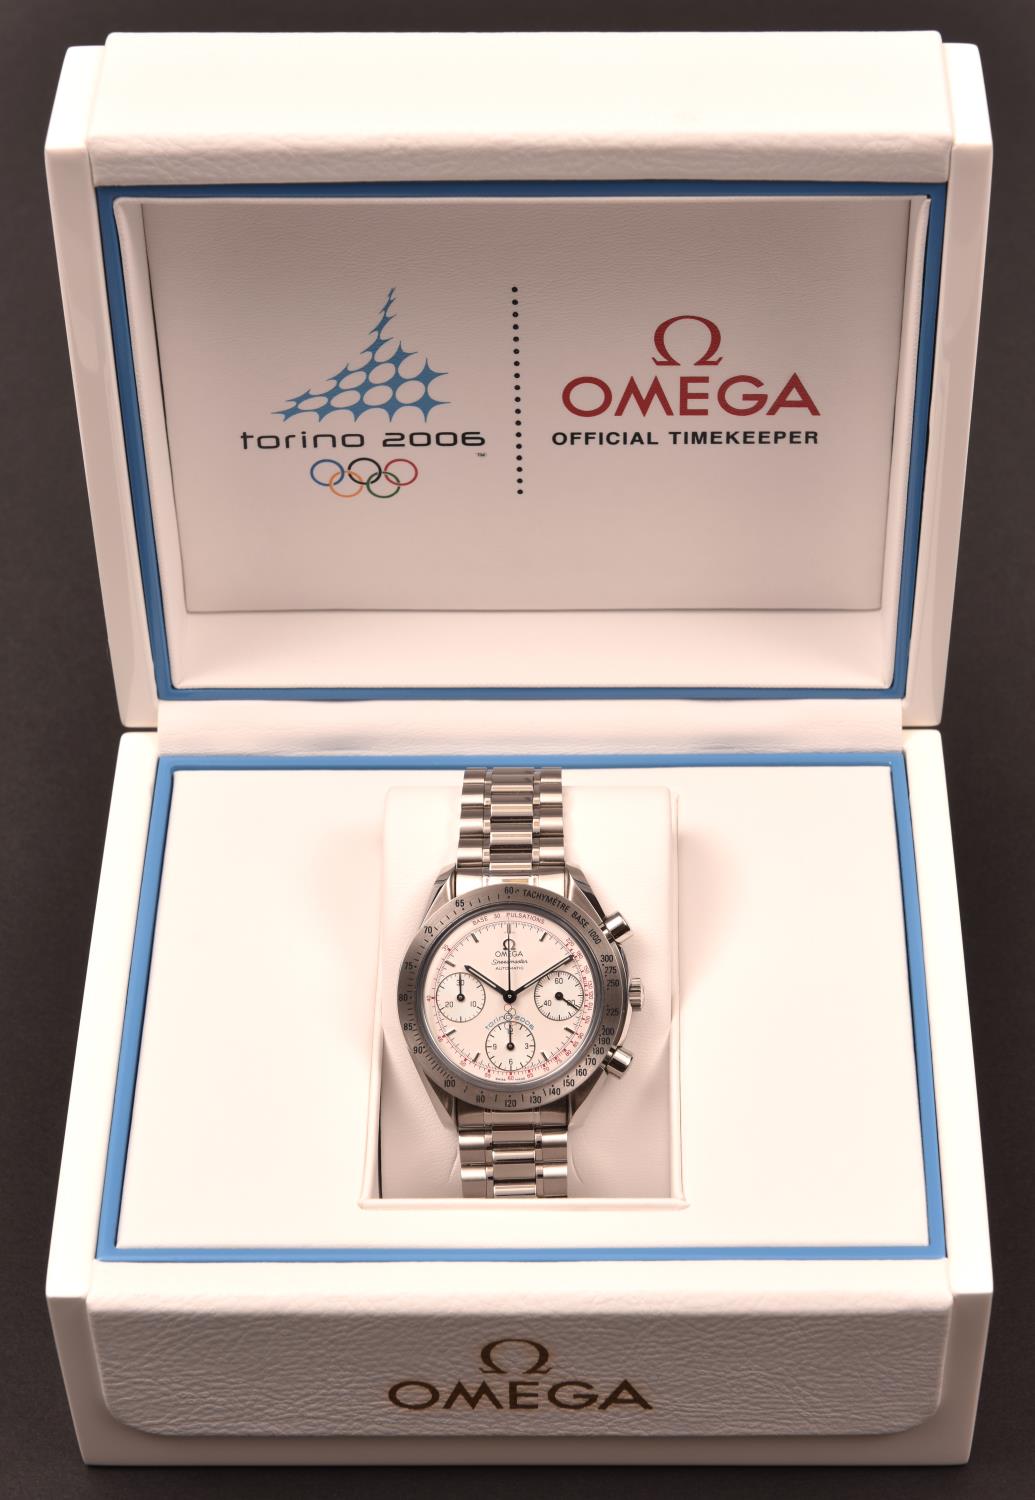 An Omega Speedmaster Chronograph Torino 2006 watch with automatic self winding mechanism. A - Image 3 of 4